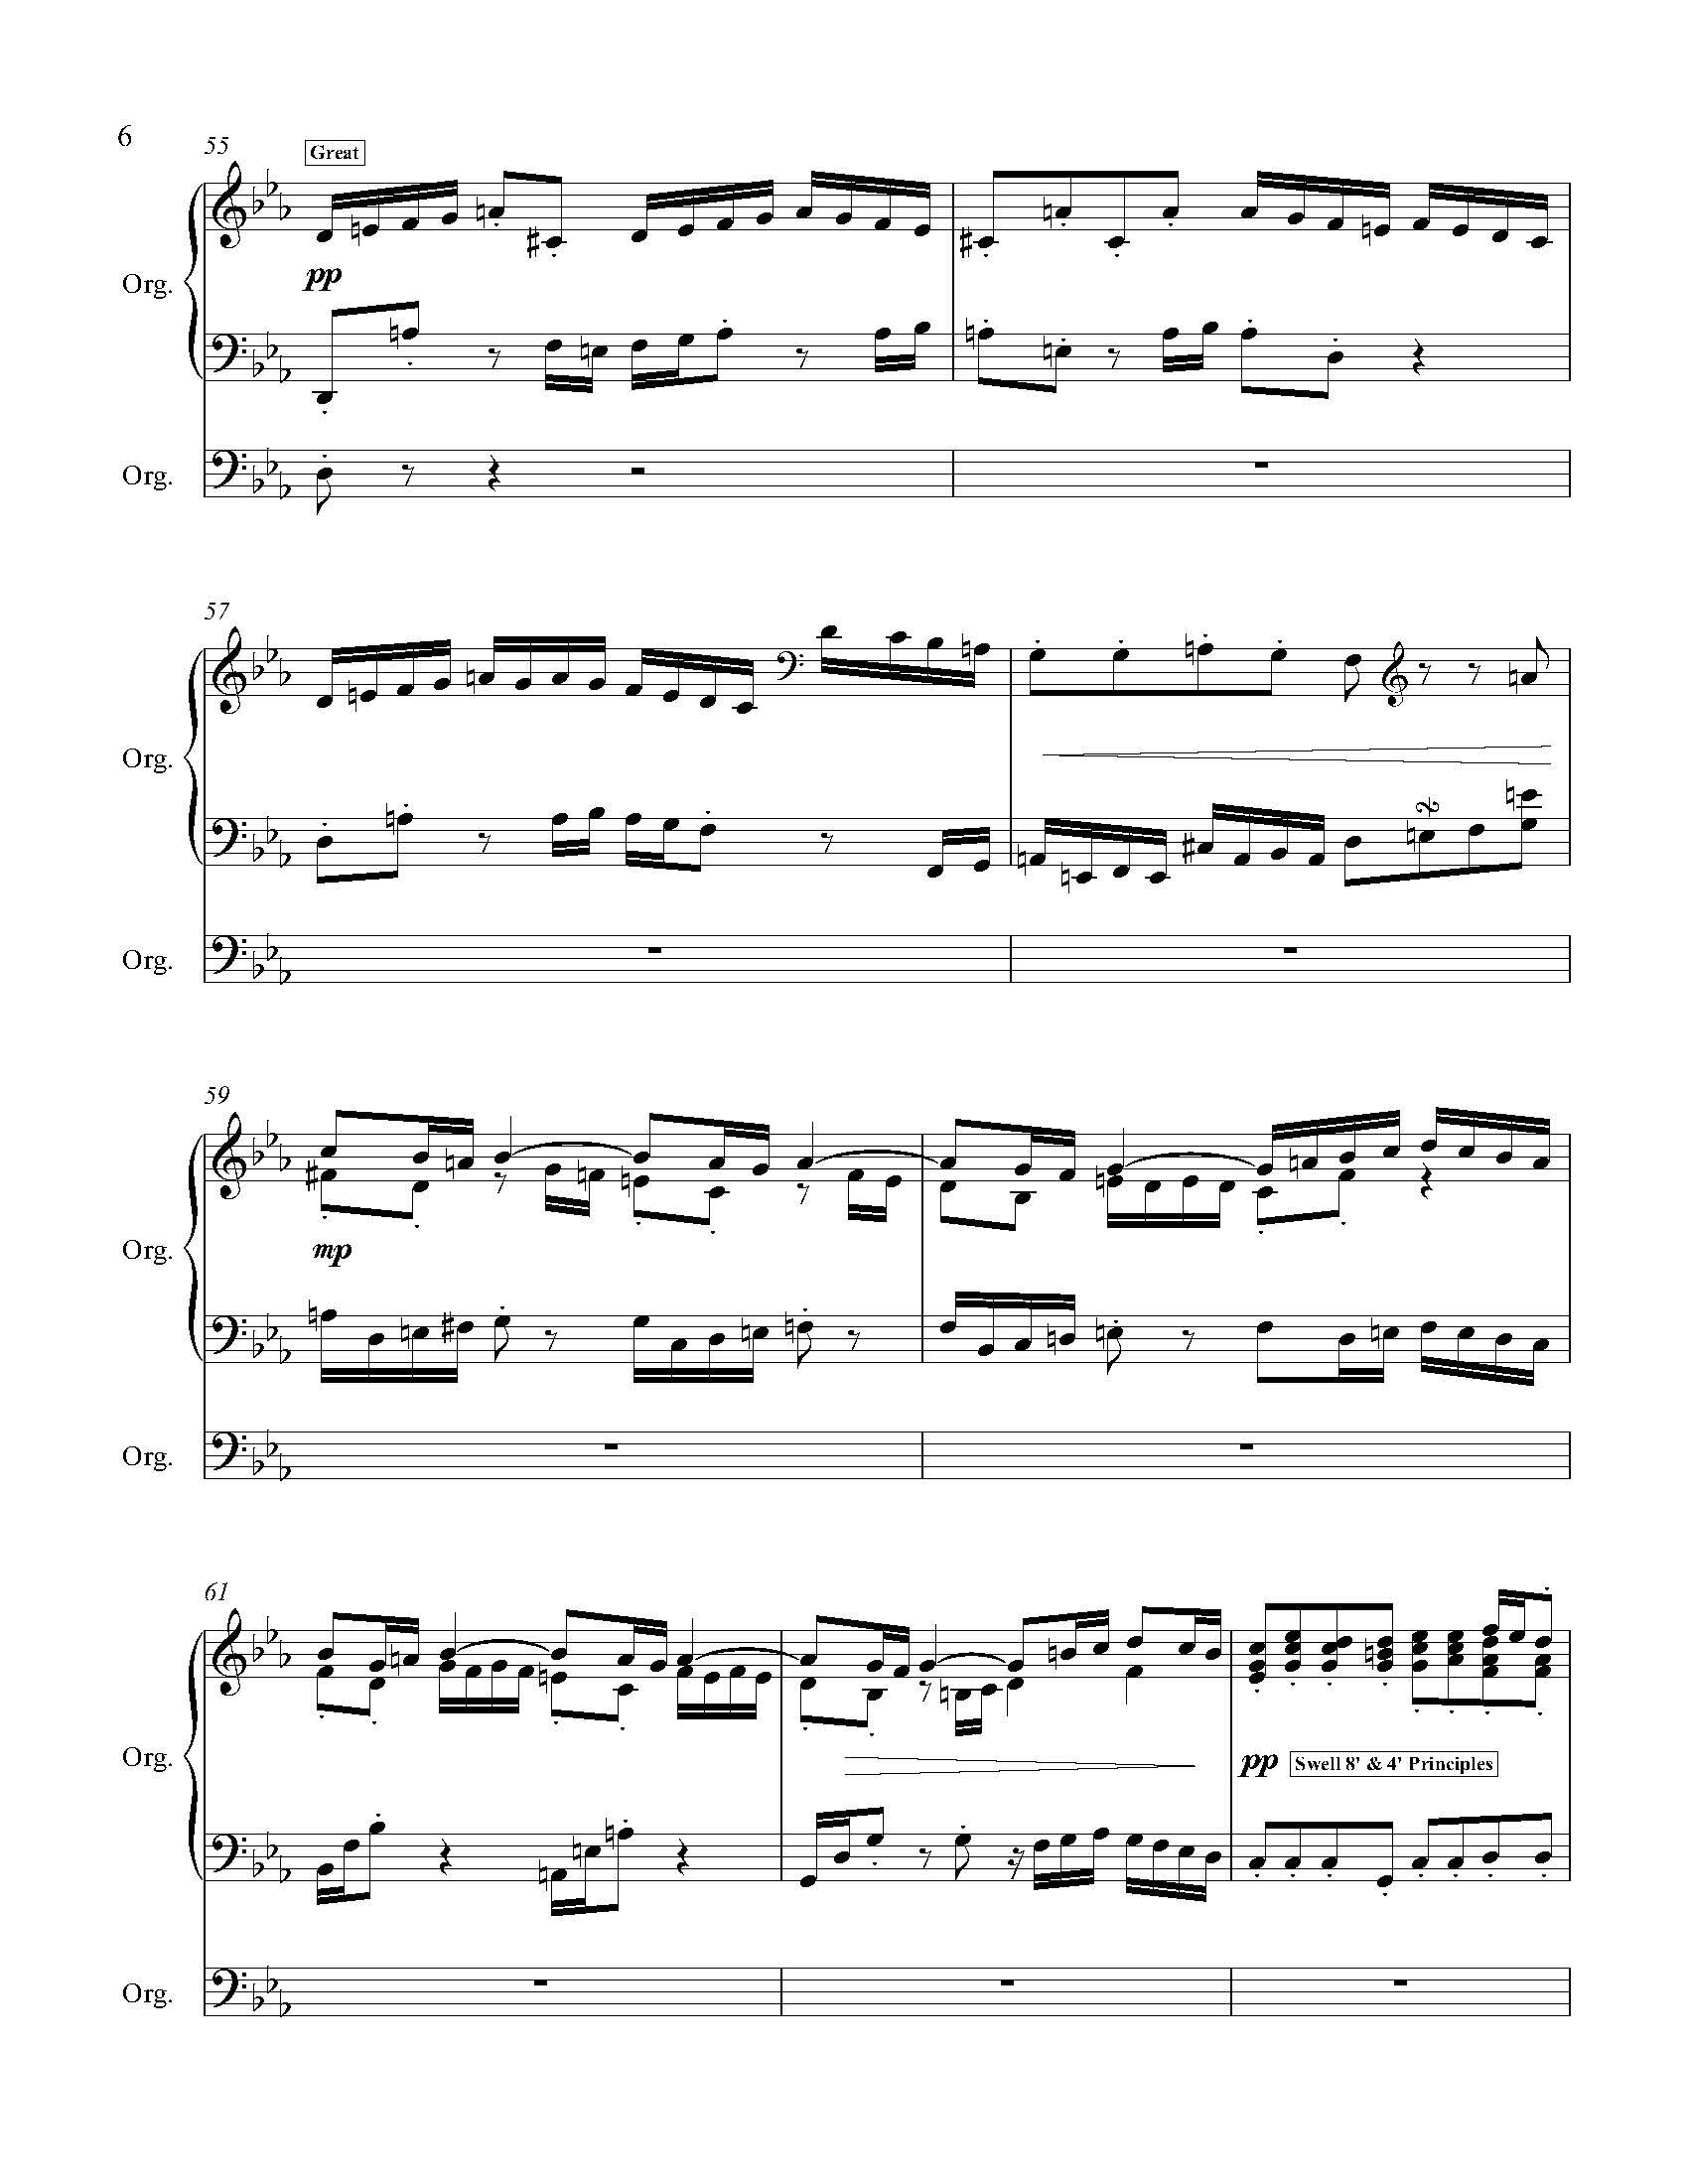 Baroque Fantasy on Go Down Moses - Complete Score_Page_12.jpg